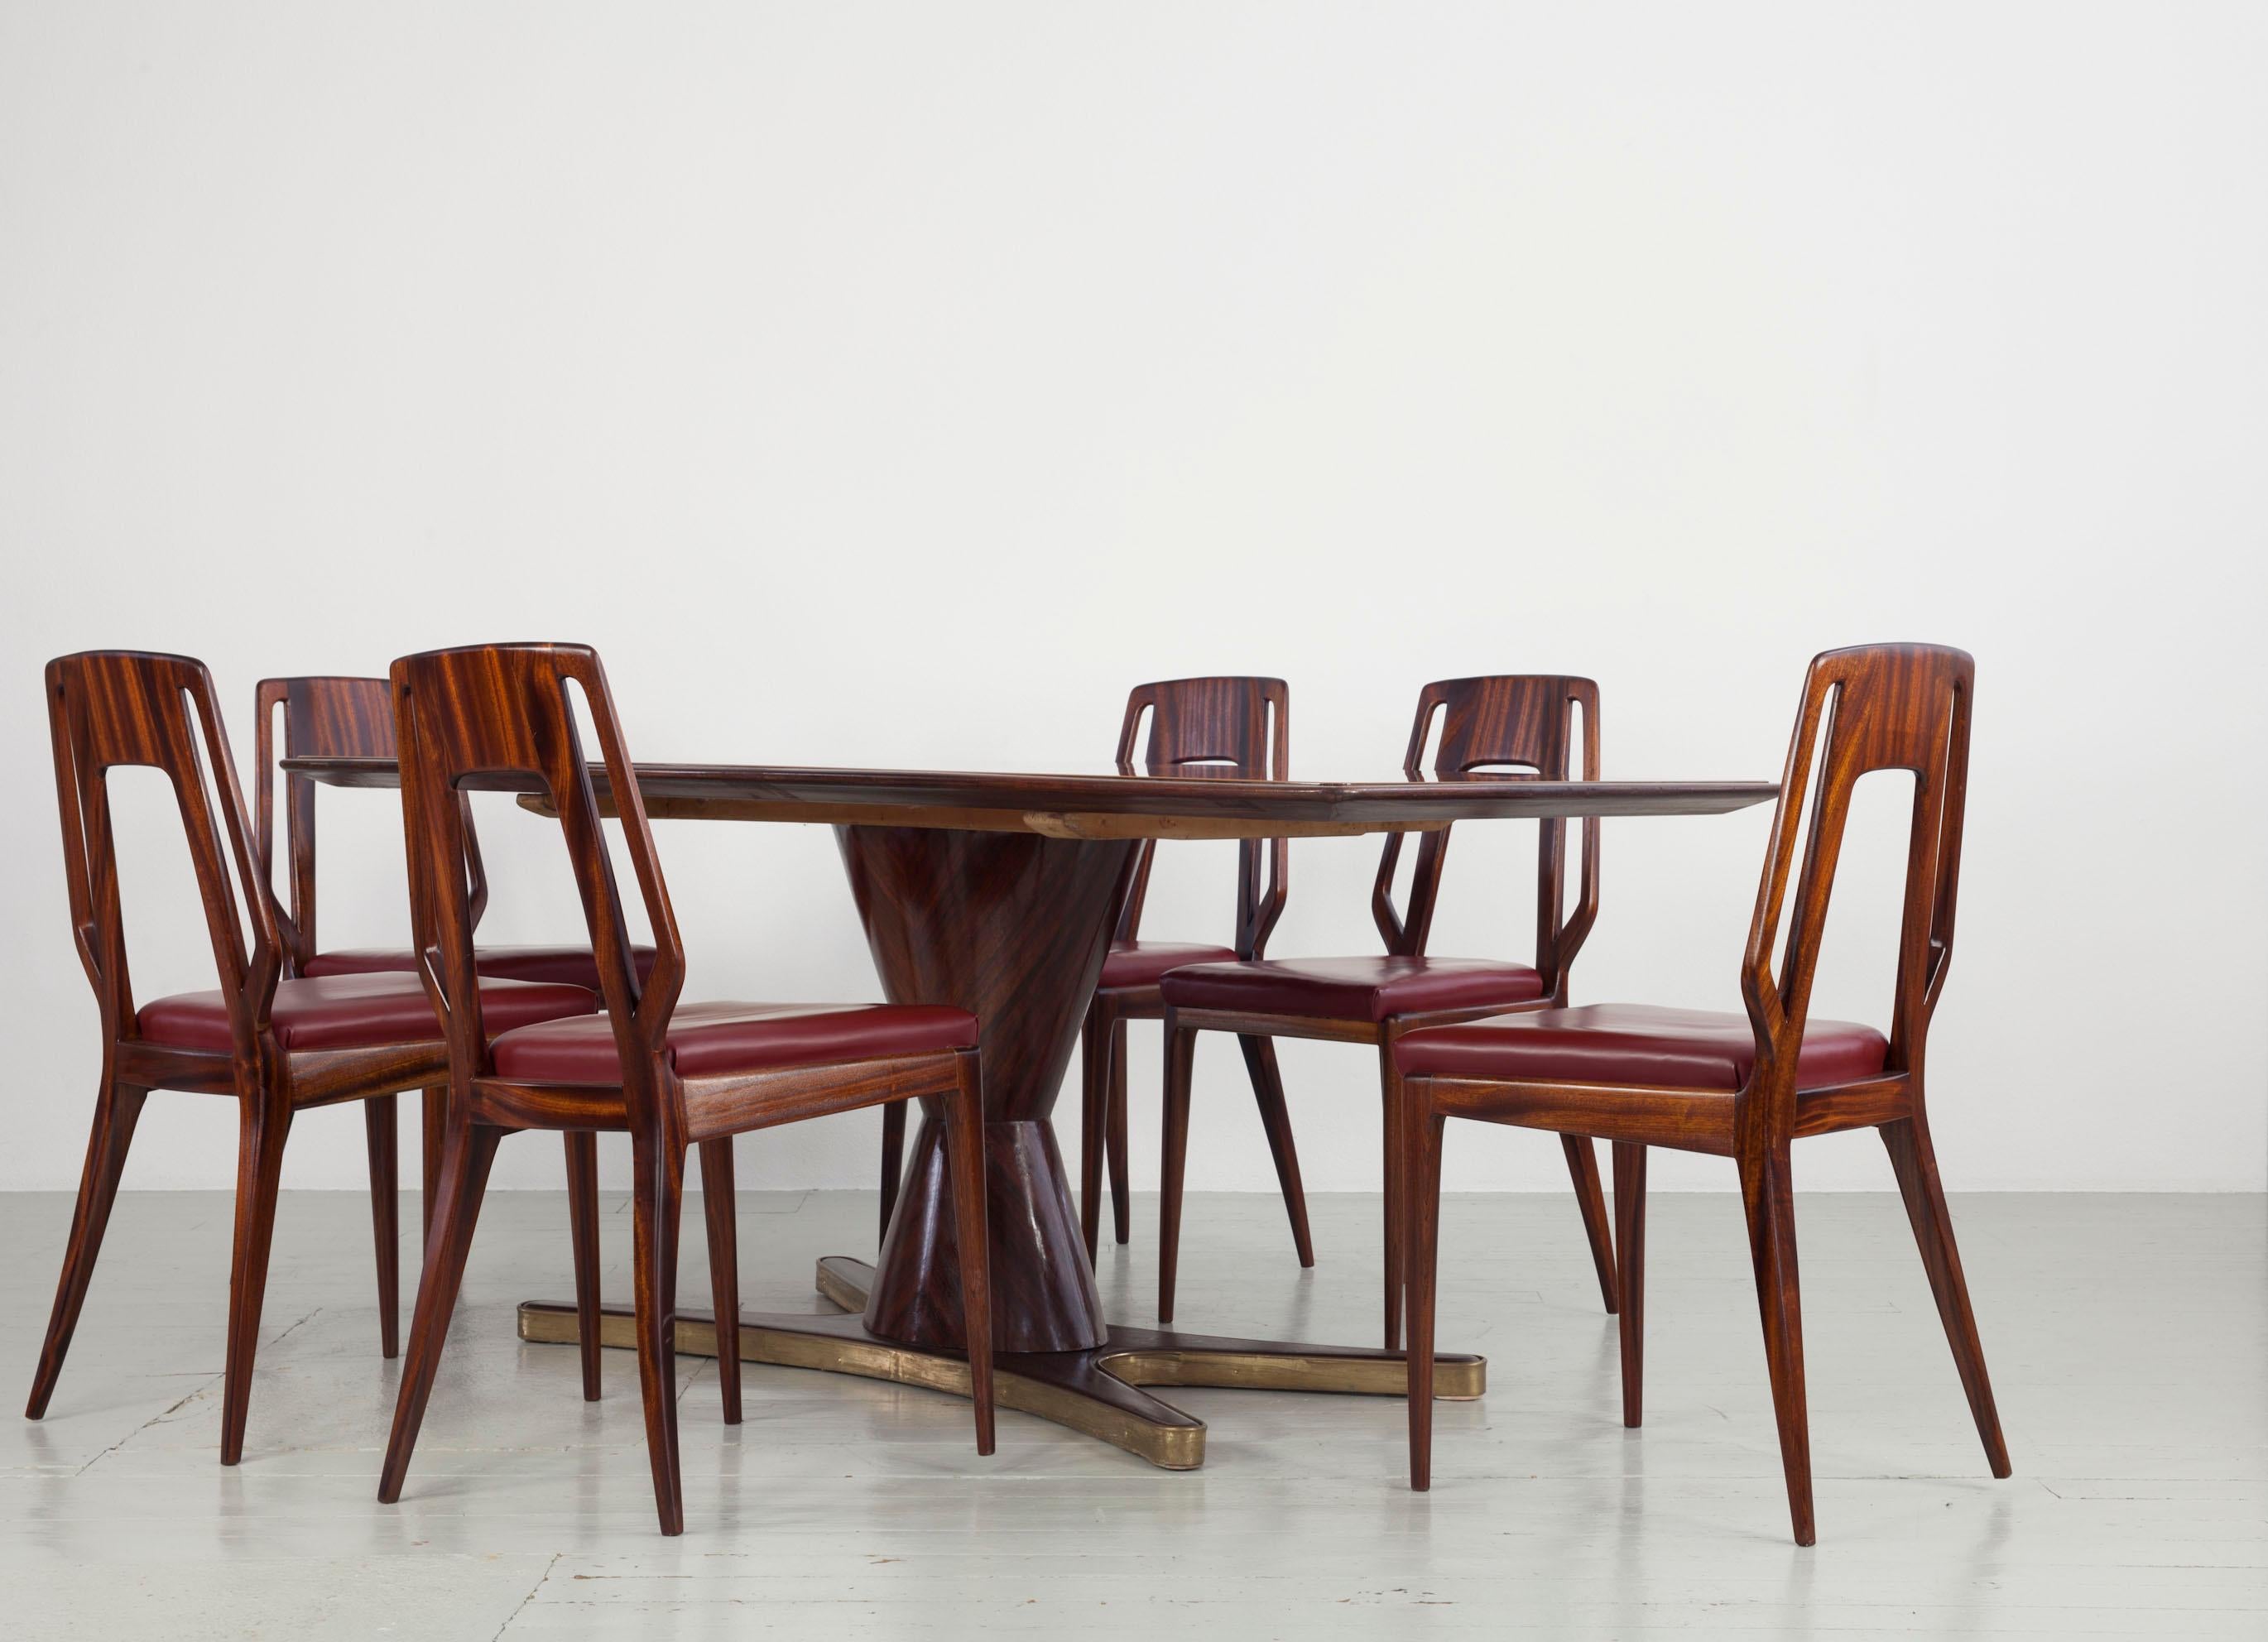 Set of 6 Italian Vittorio Dassi Dining Room Chairs, 1950s For Sale 9